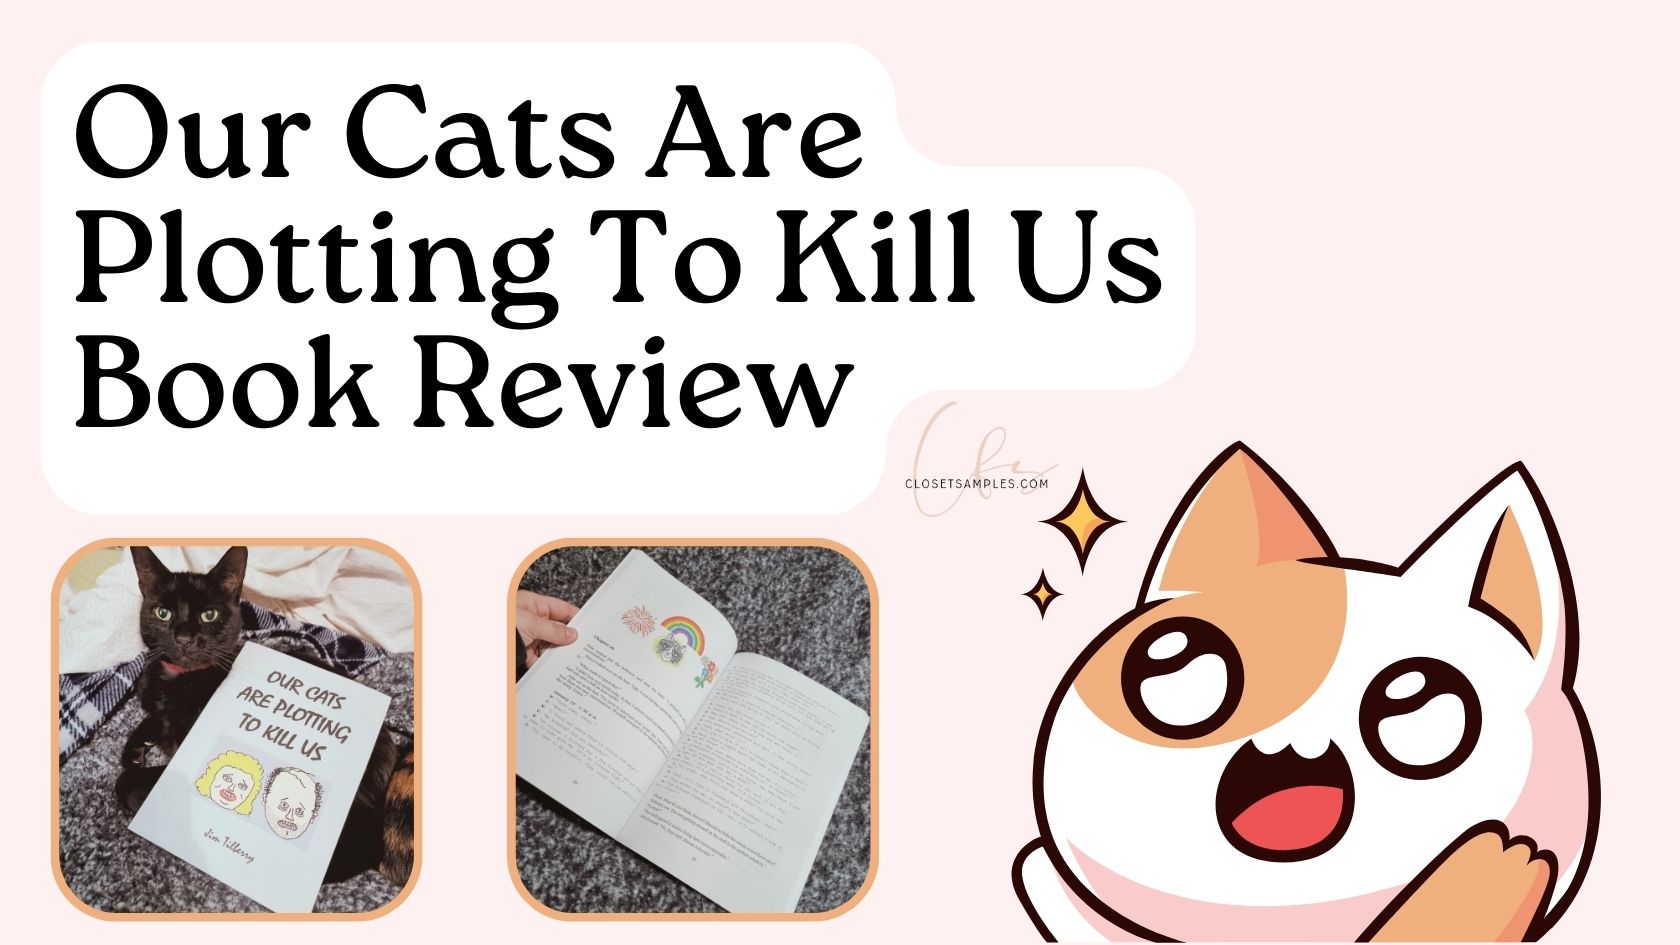 Our Cats Are Plotting To Kill Us Book Review